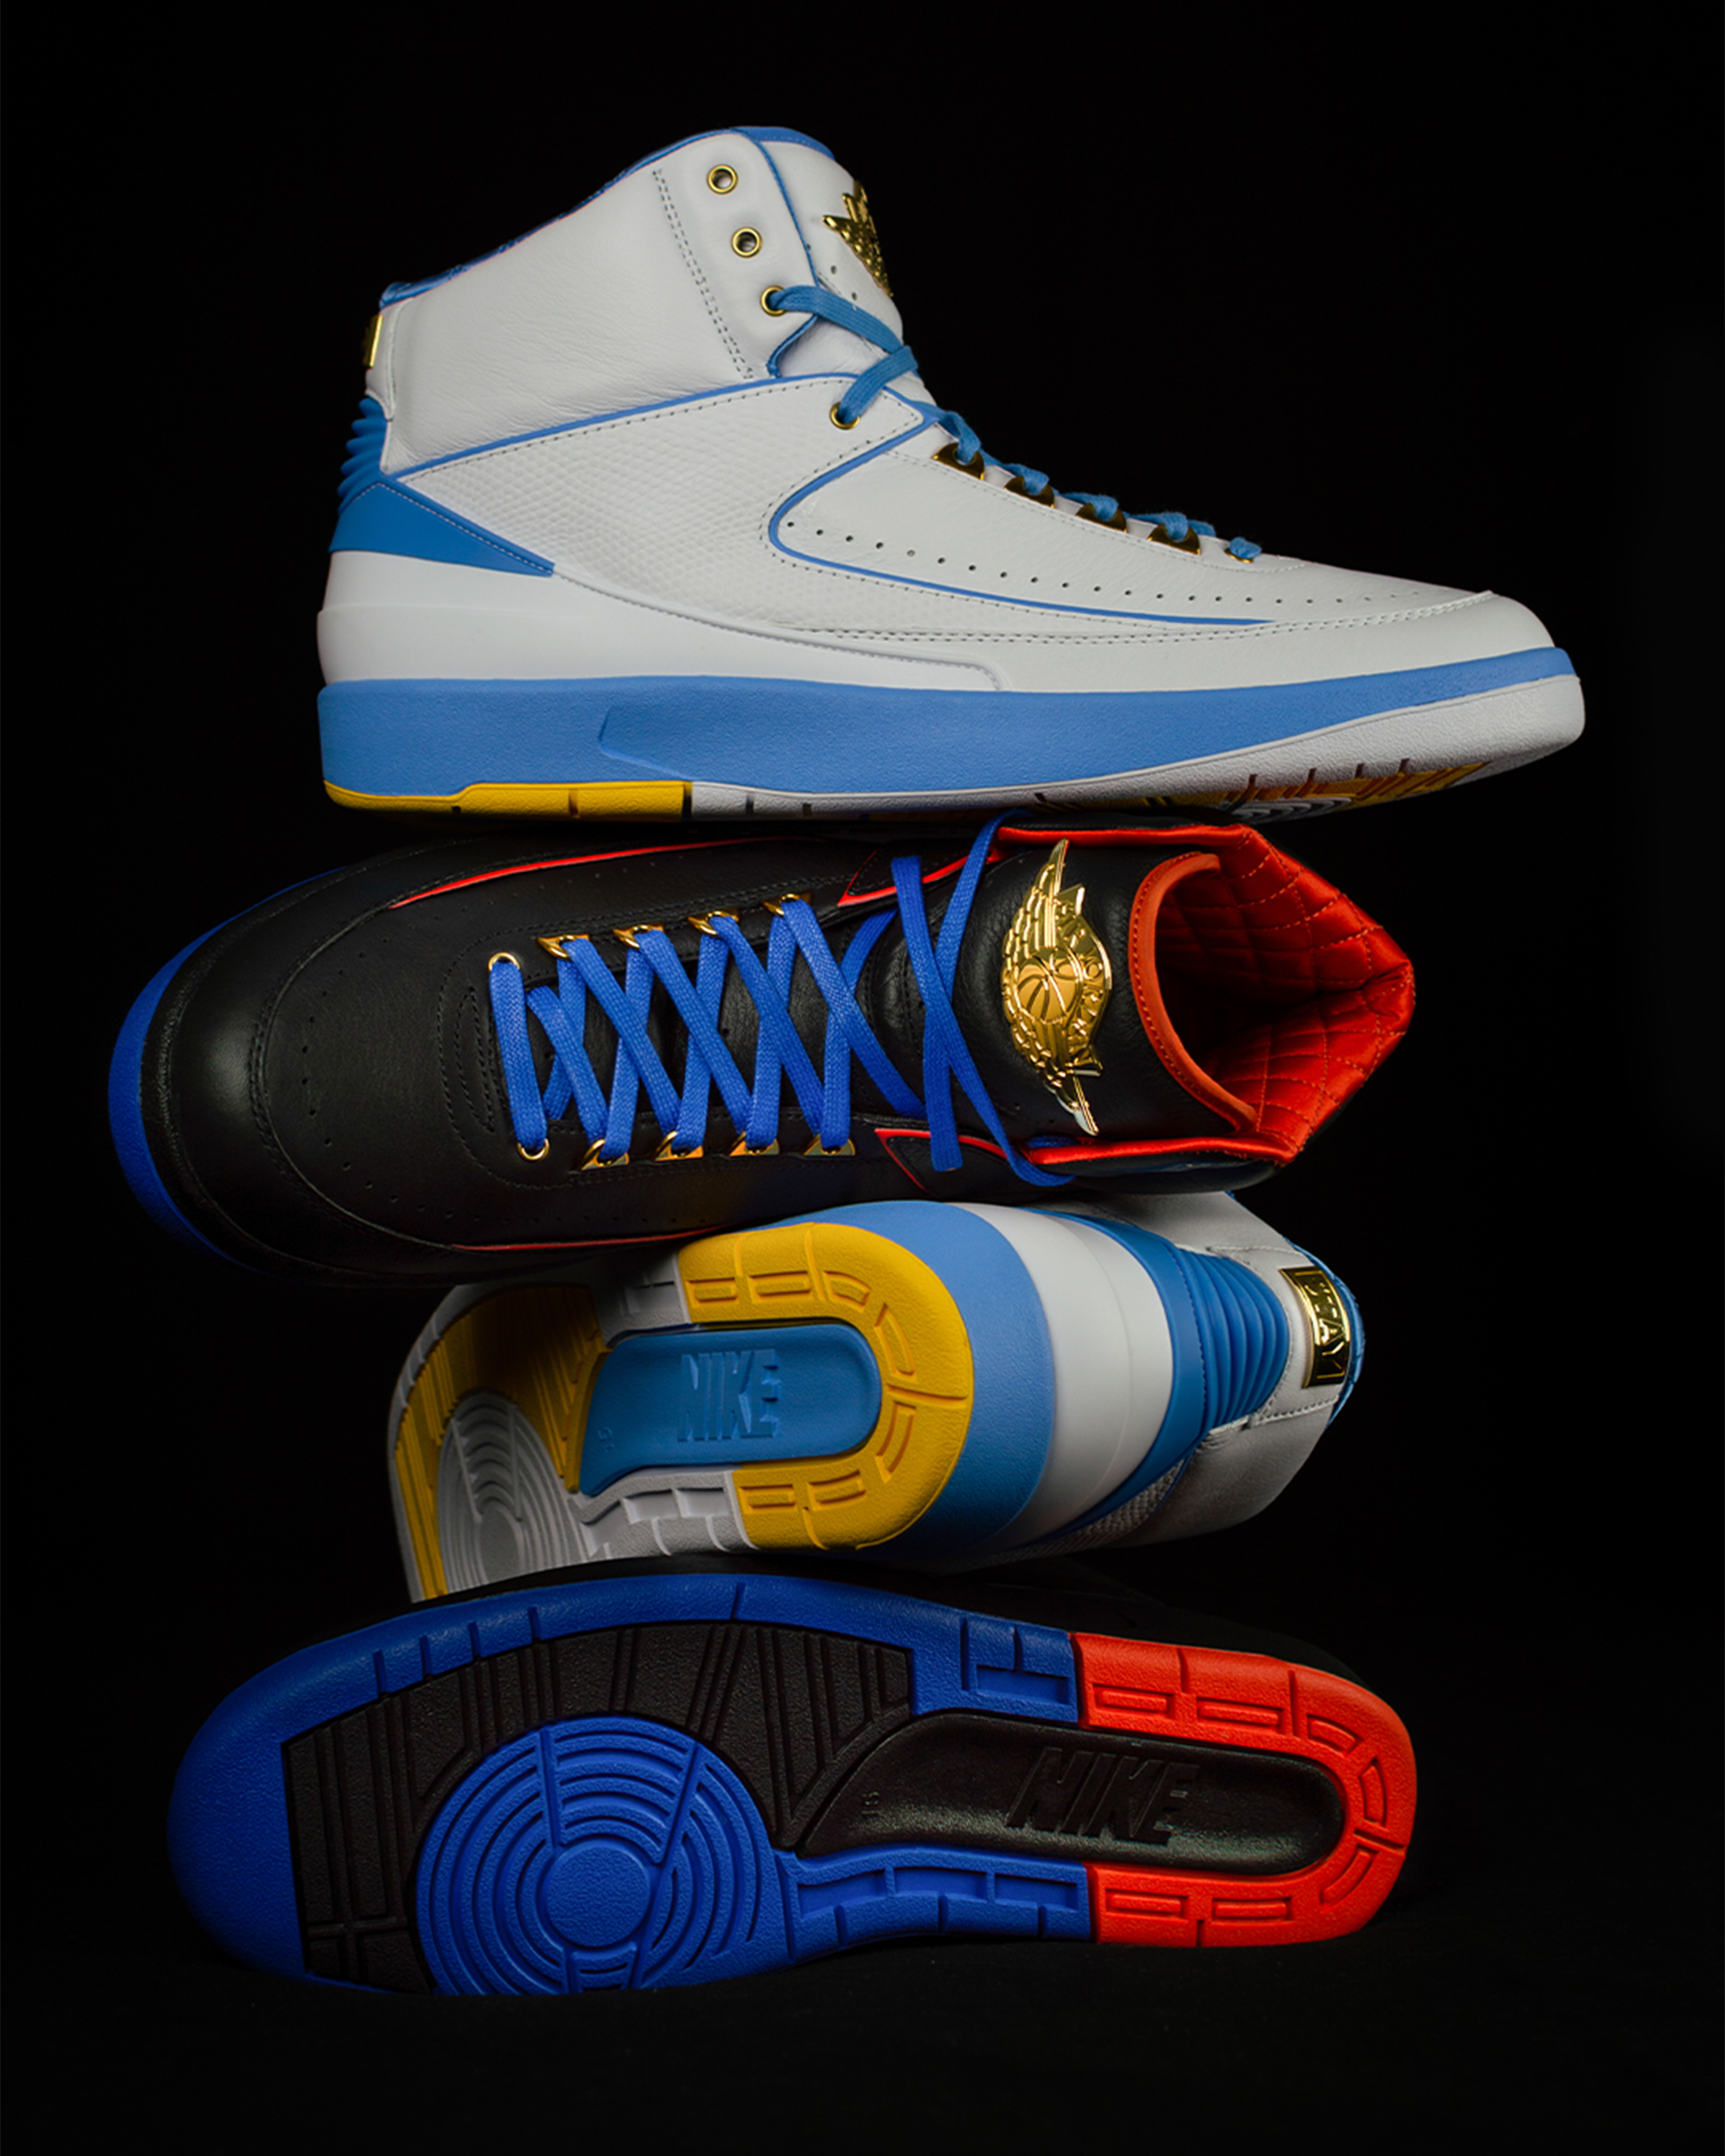 Camelo Anthony Air Jordan 2 Retirement Pack Nuggets Knicks (4)